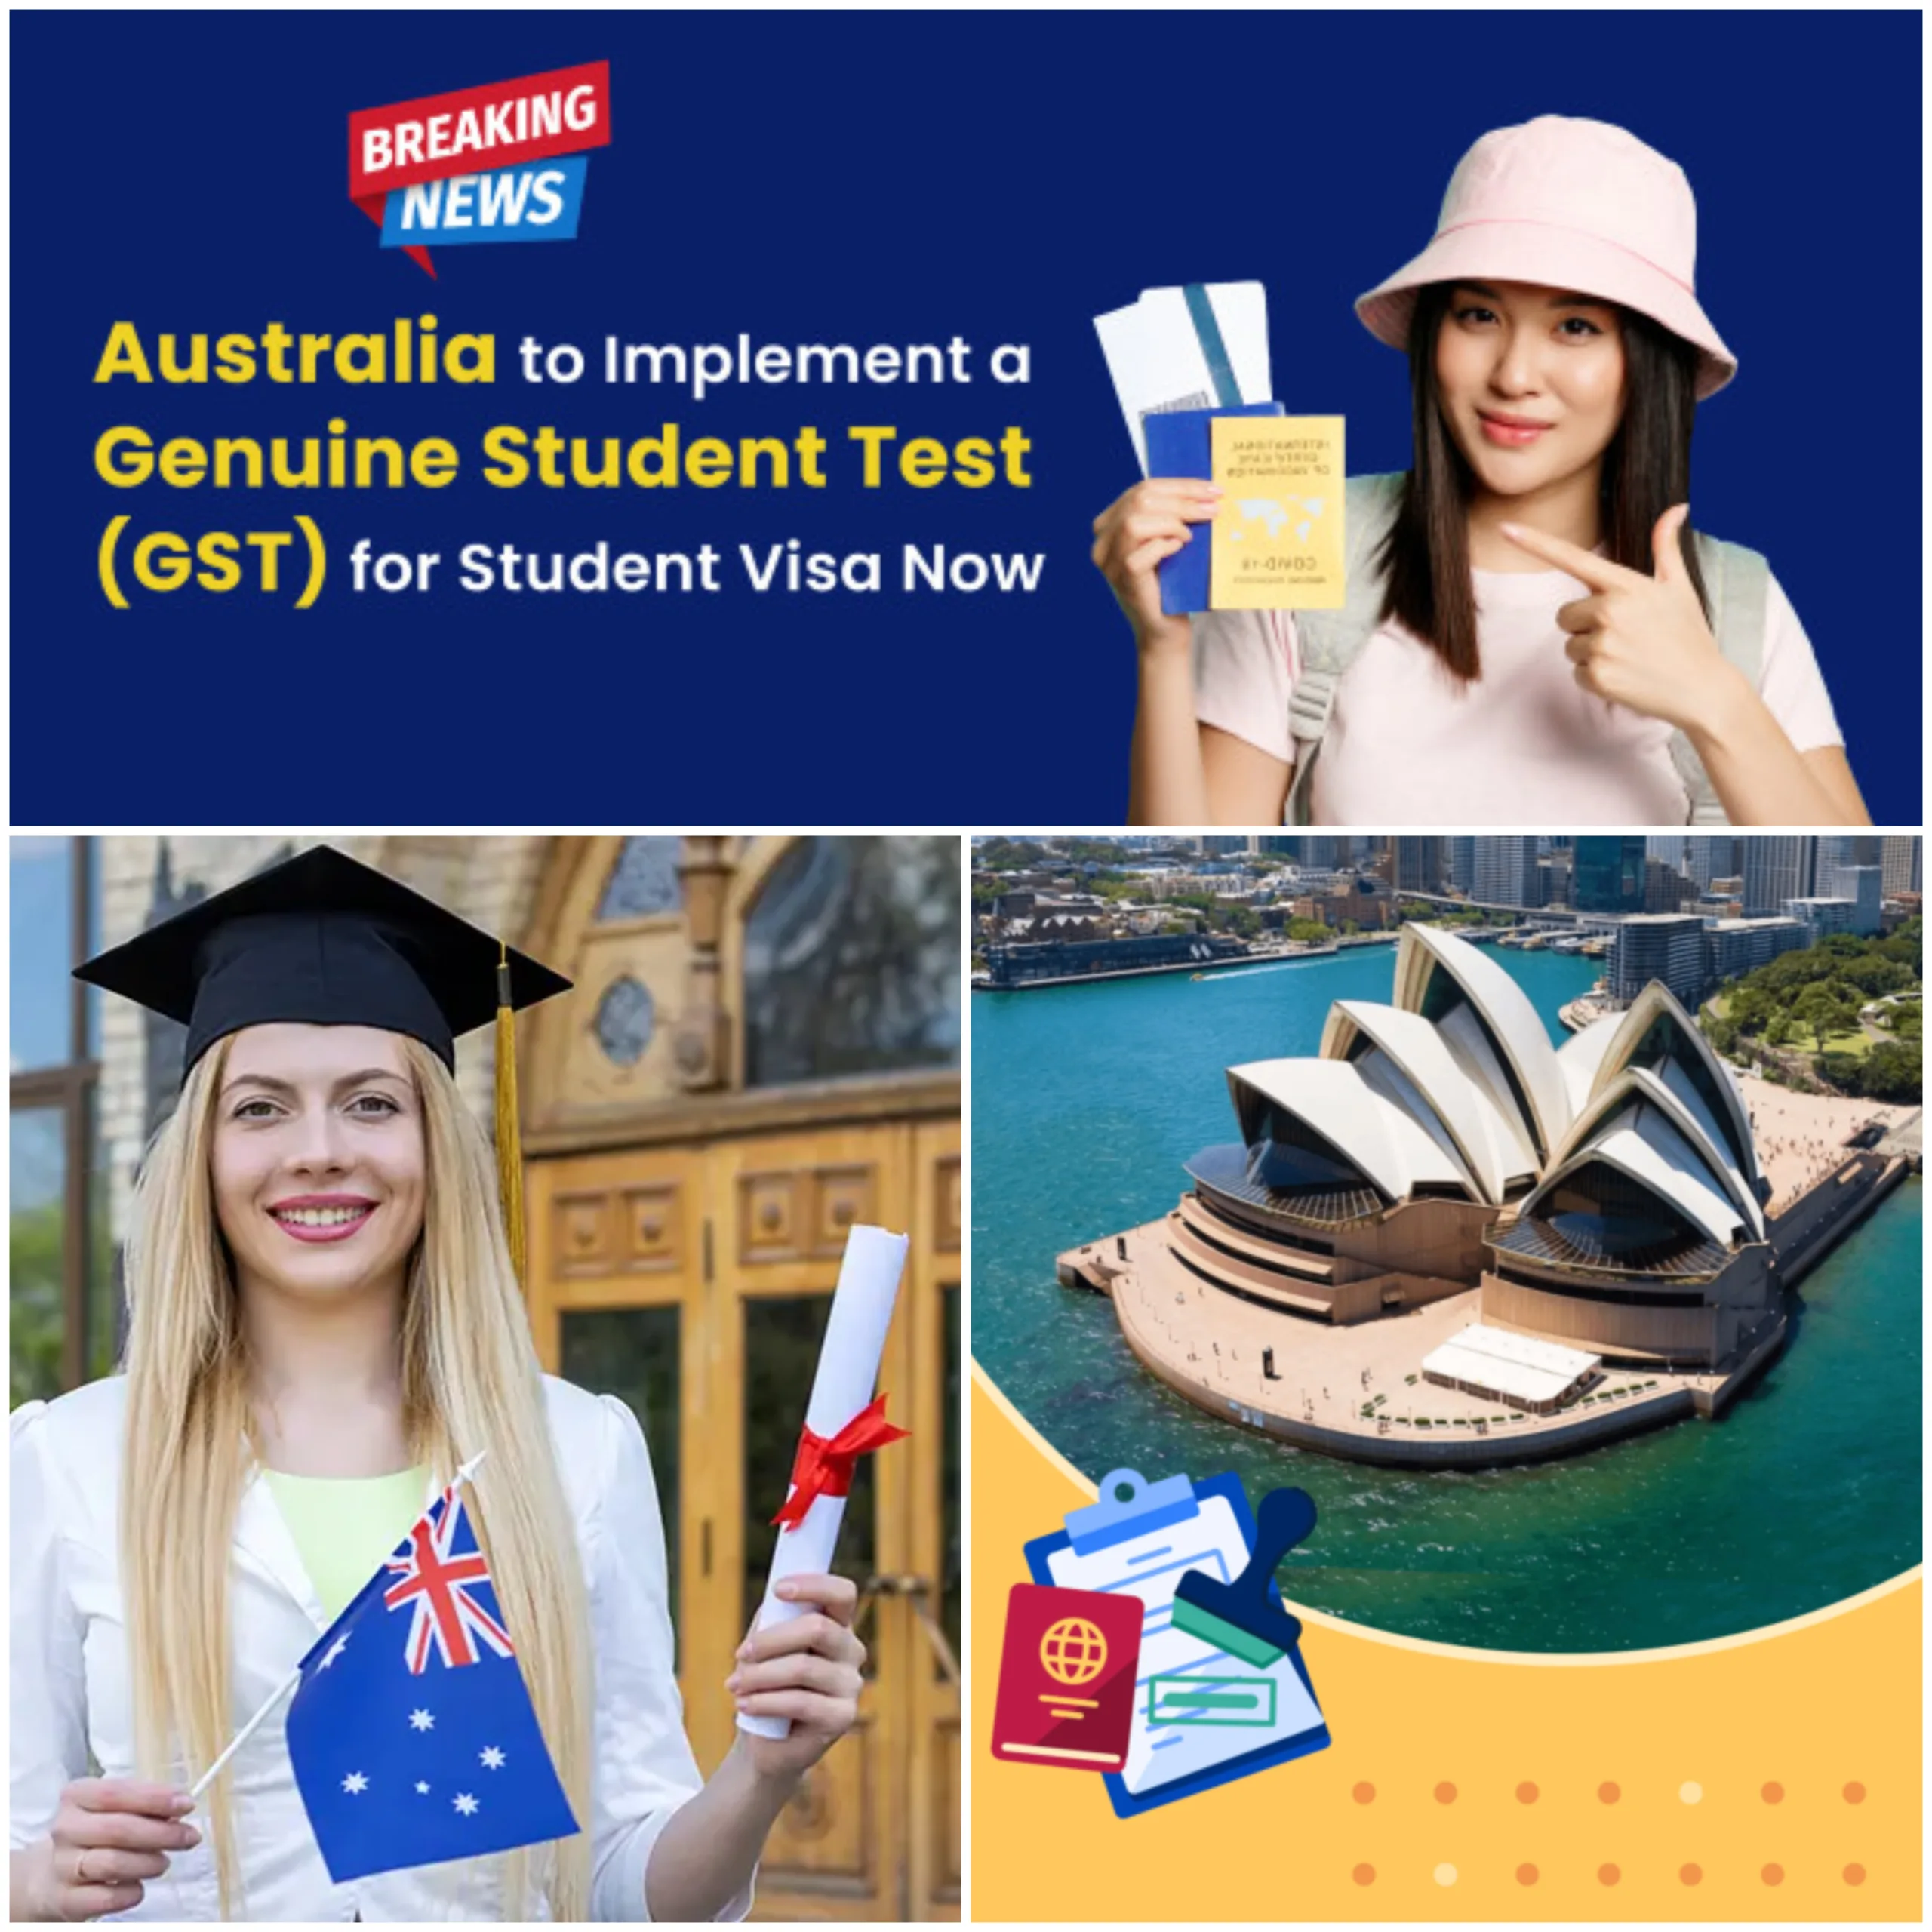 What is Genuine Student Test in Australia?